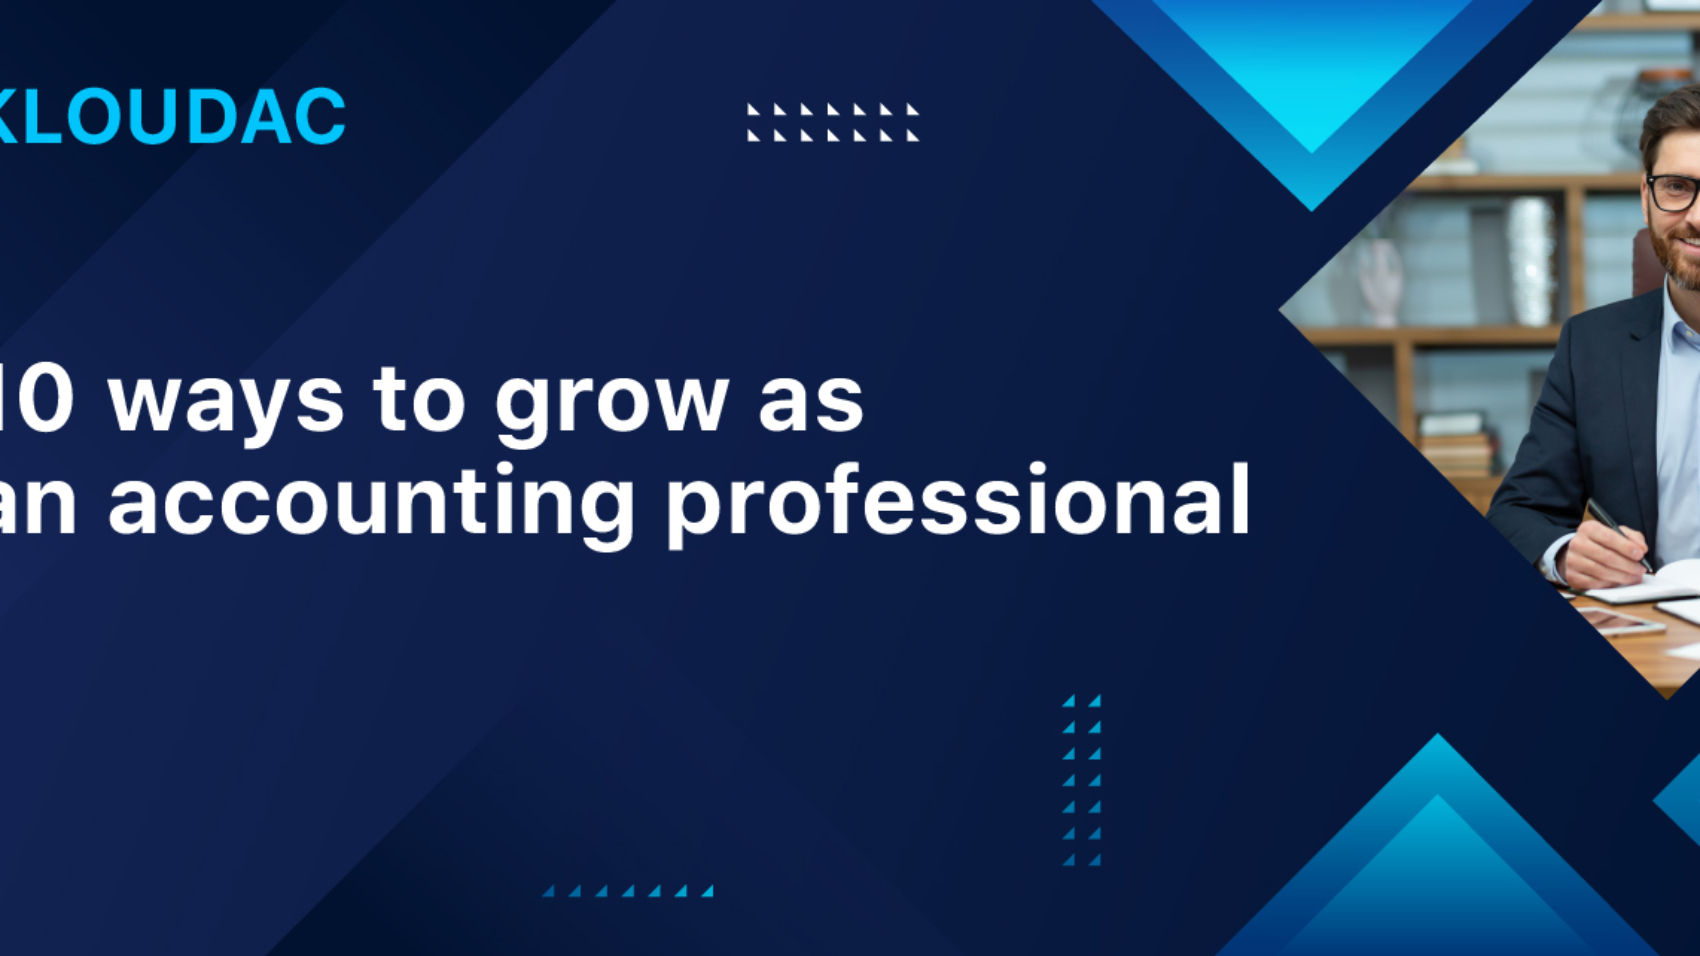 10 Ways to grow as an accounting professional